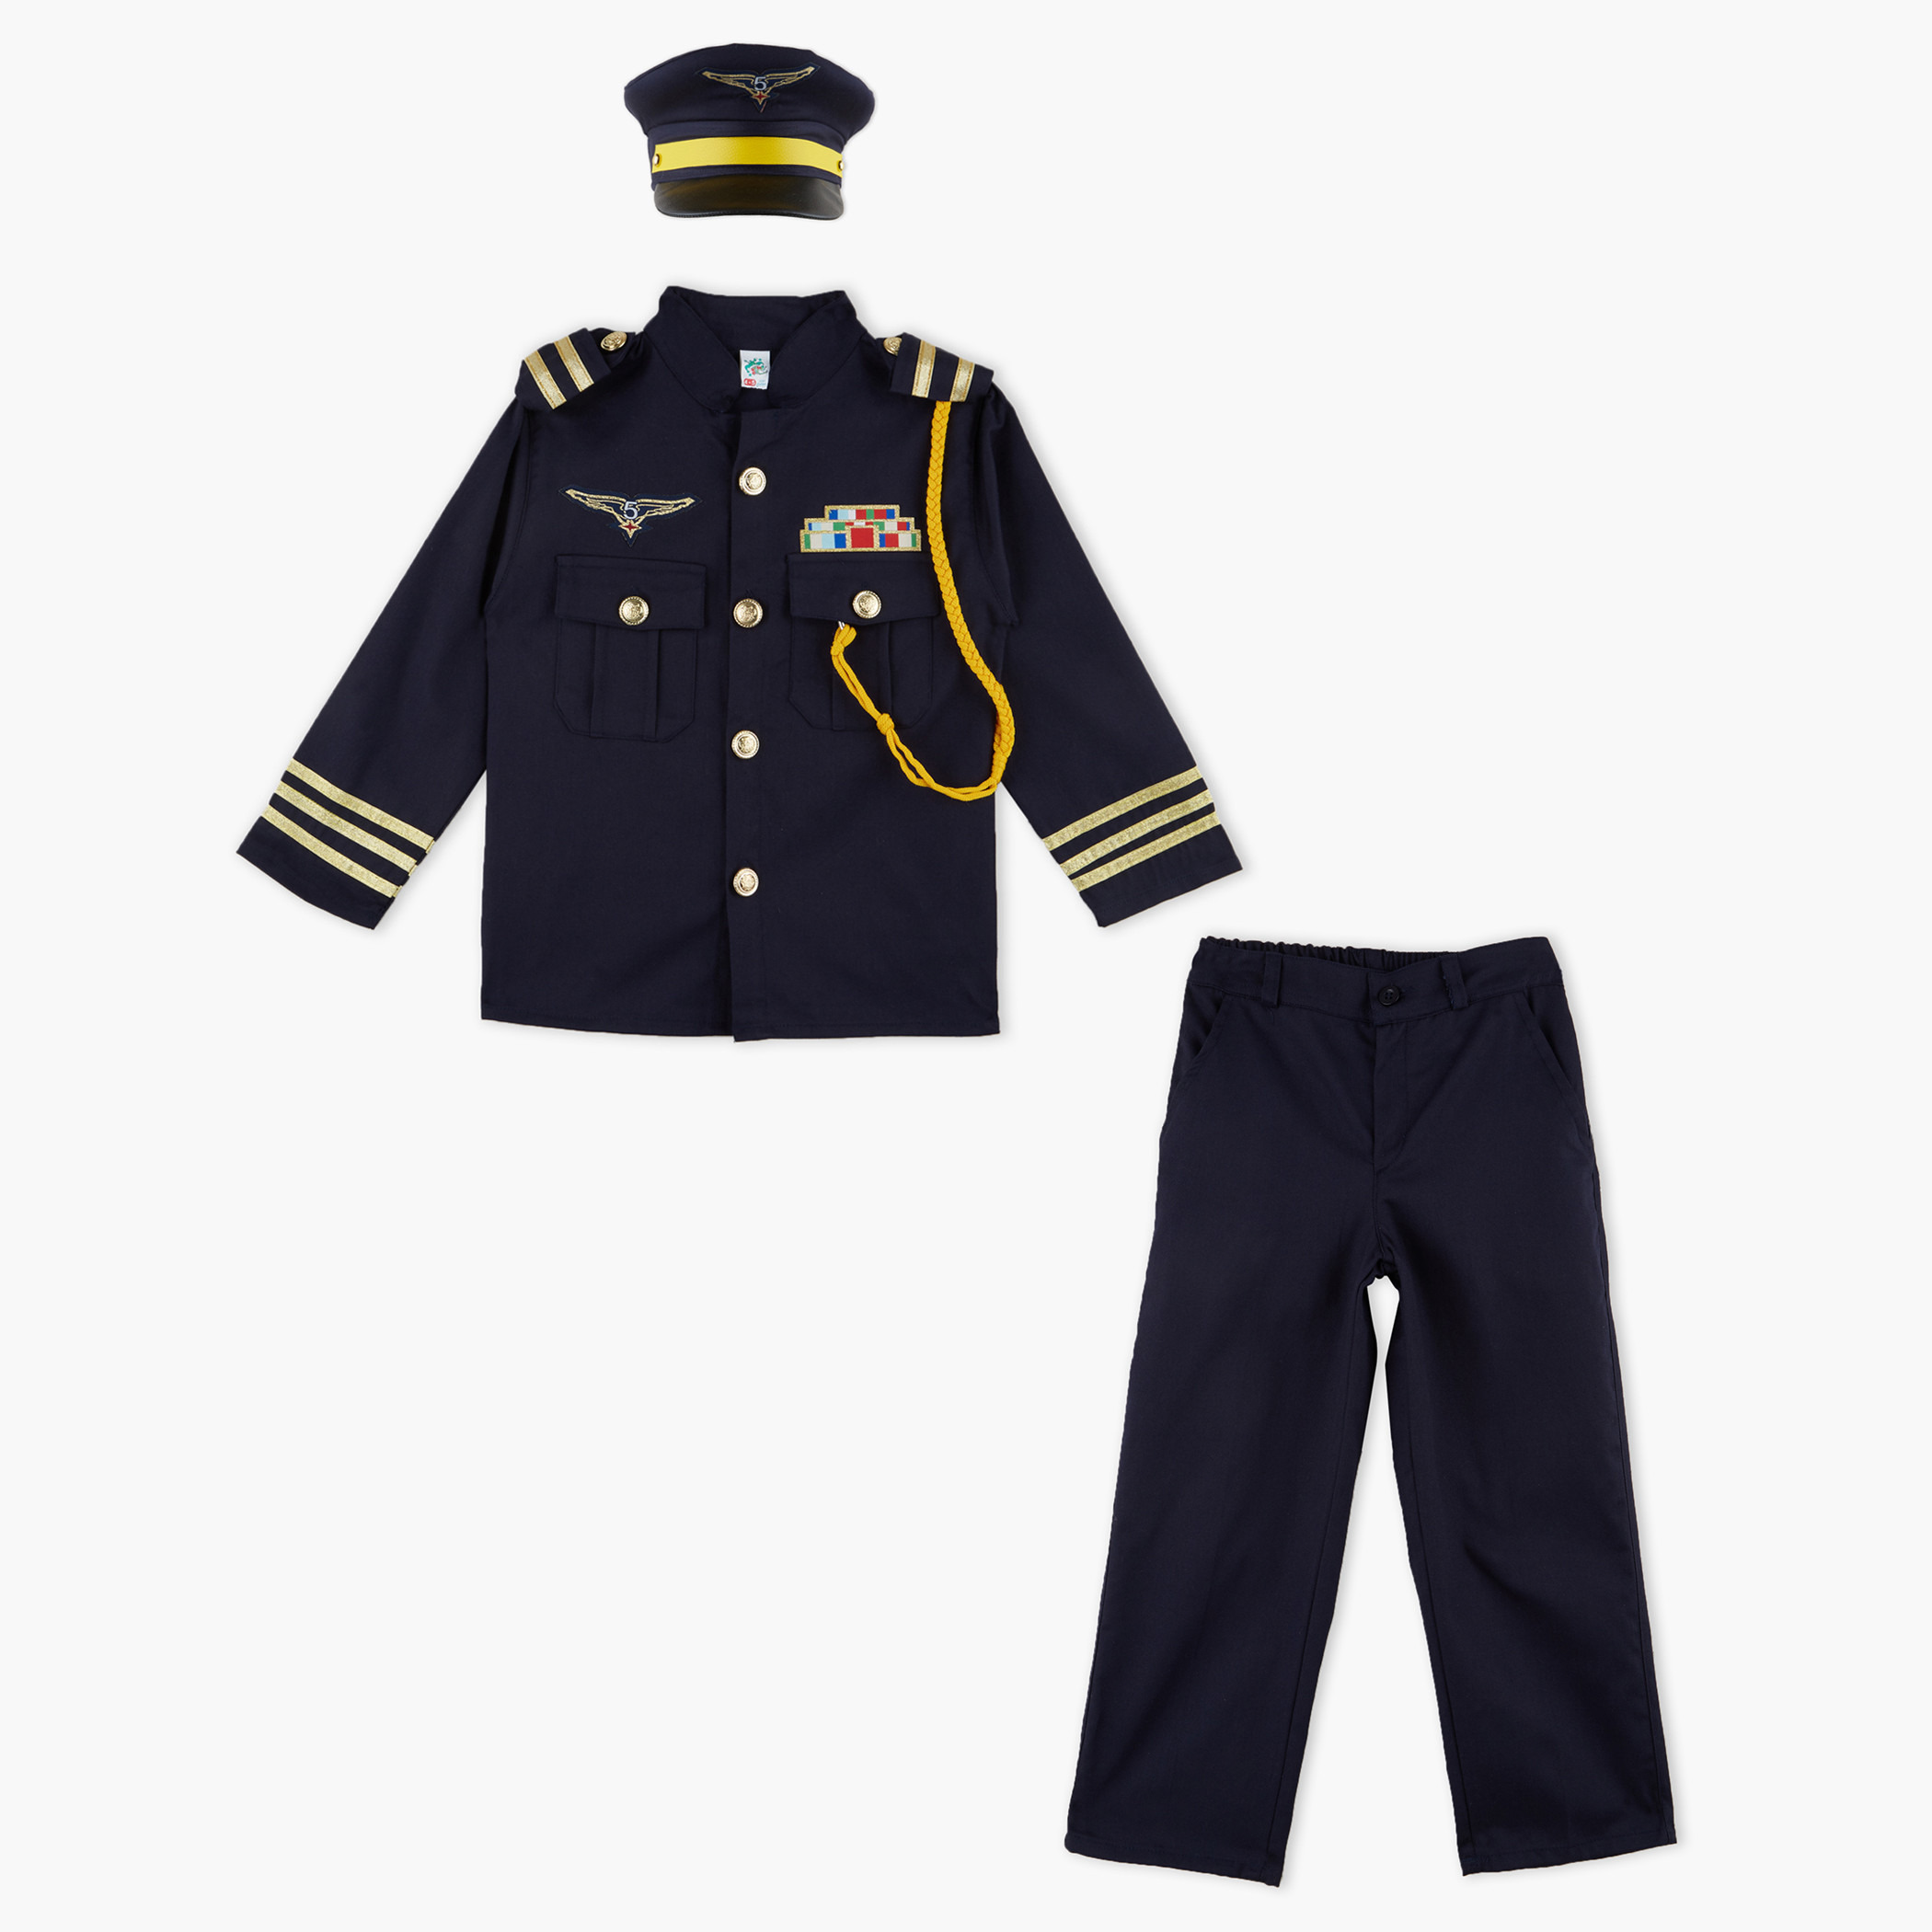 Fancy Dressup Air force Pilot 5 to 6 years Kids Costume Wear Price in India  - Buy Fancy Dressup Air force Pilot 5 to 6 years Kids Costume Wear online  at Flipkart.com